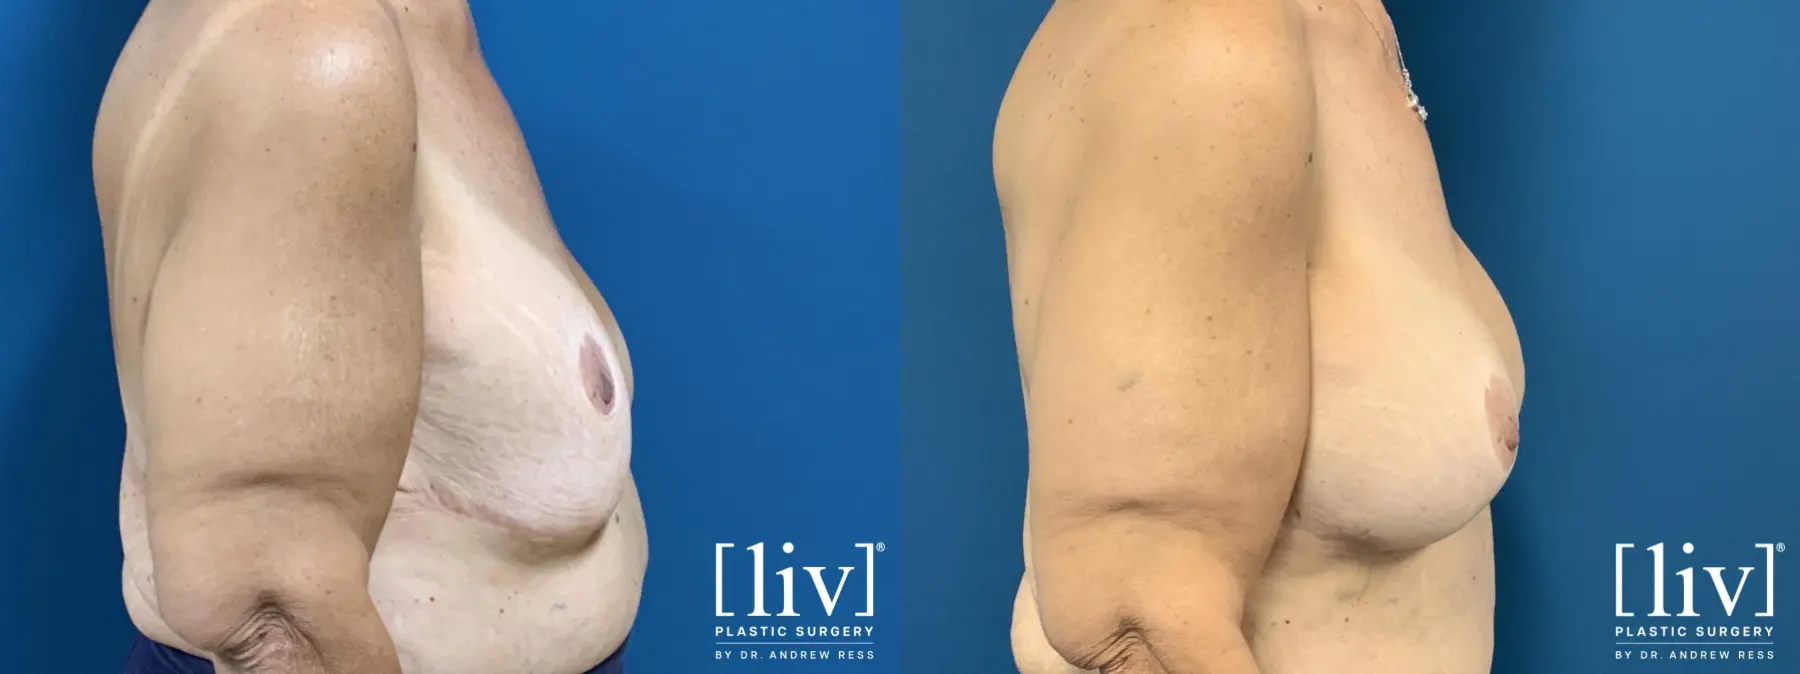 Breast Implant Exchange and Repositioning - Before and After 5